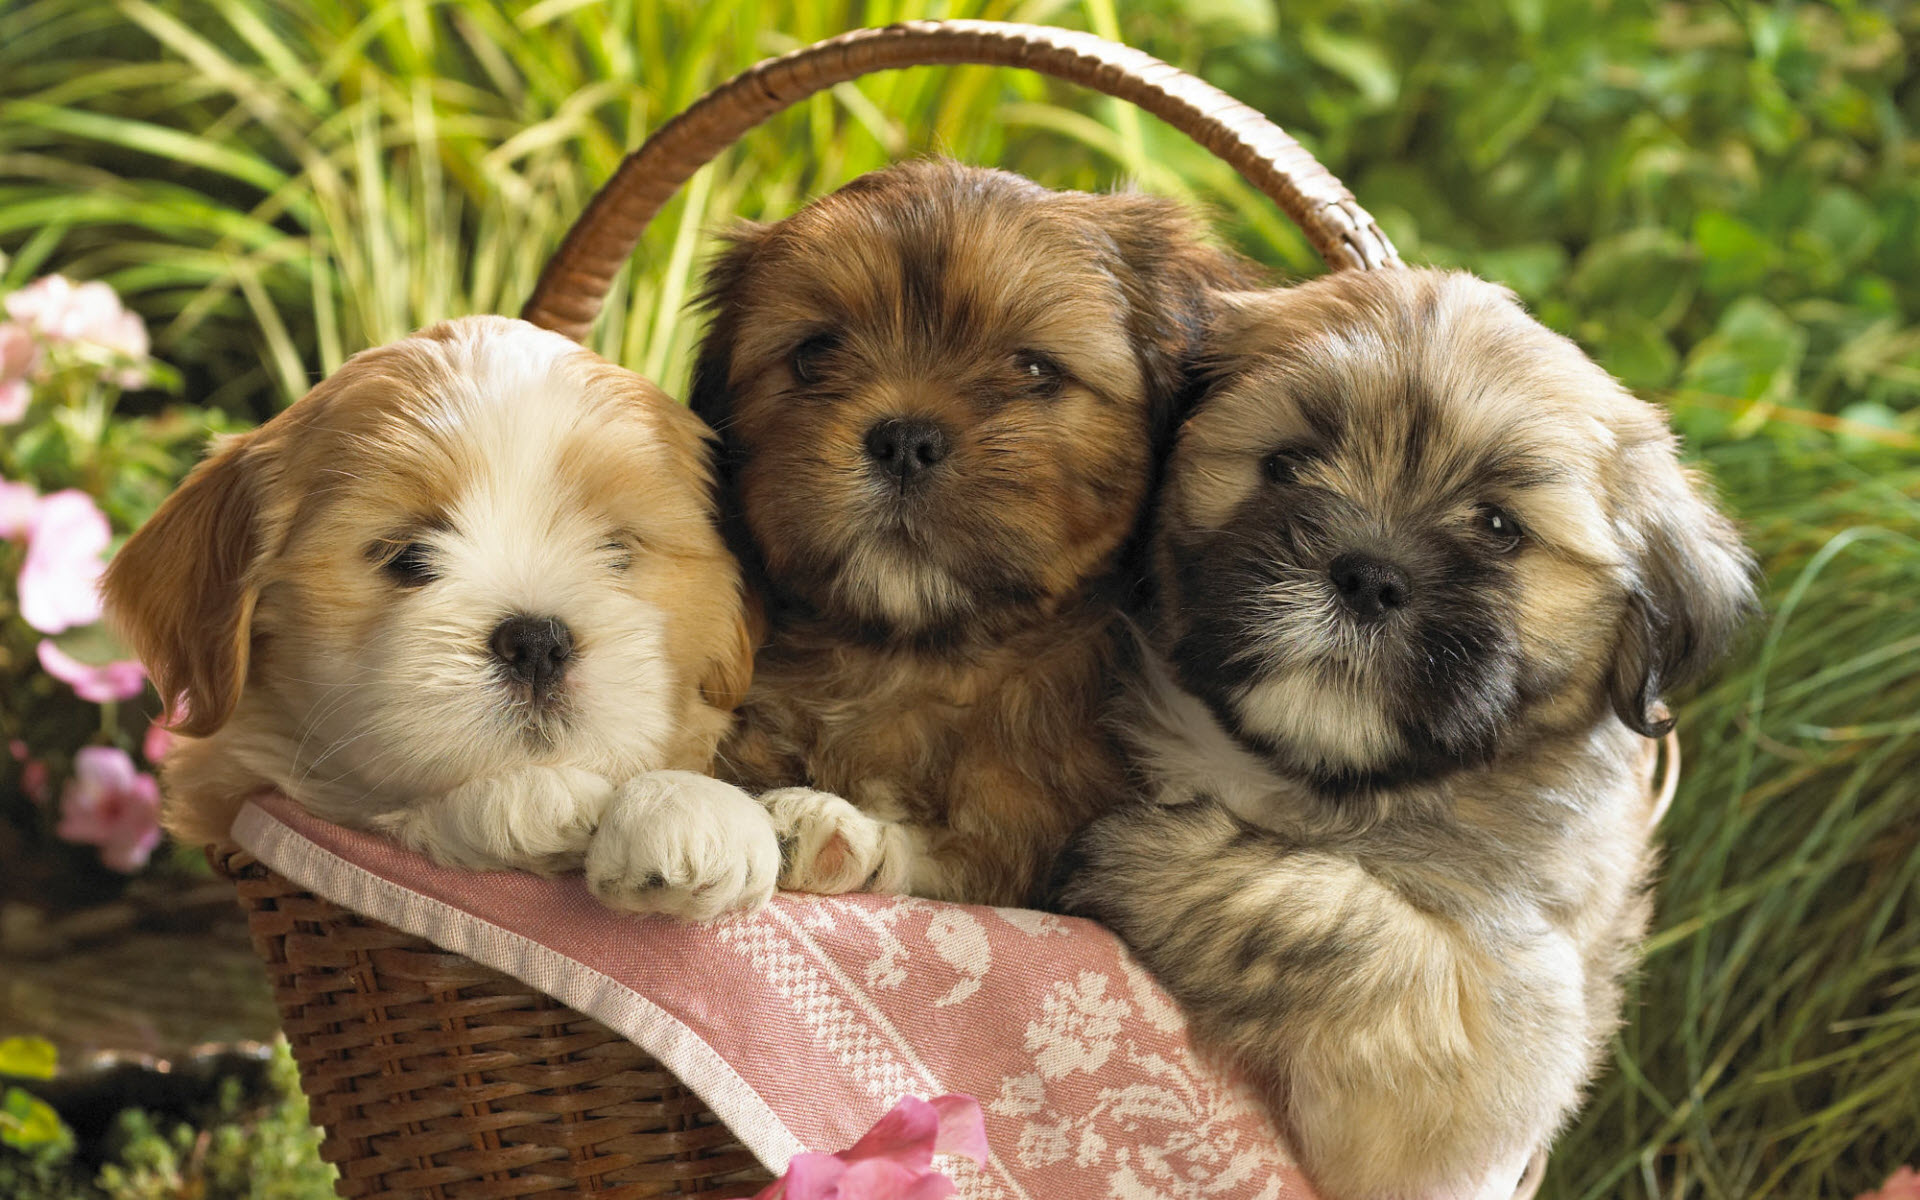 Cute Puppies 2 Wallpapers HD Wallpapers 1920x1200